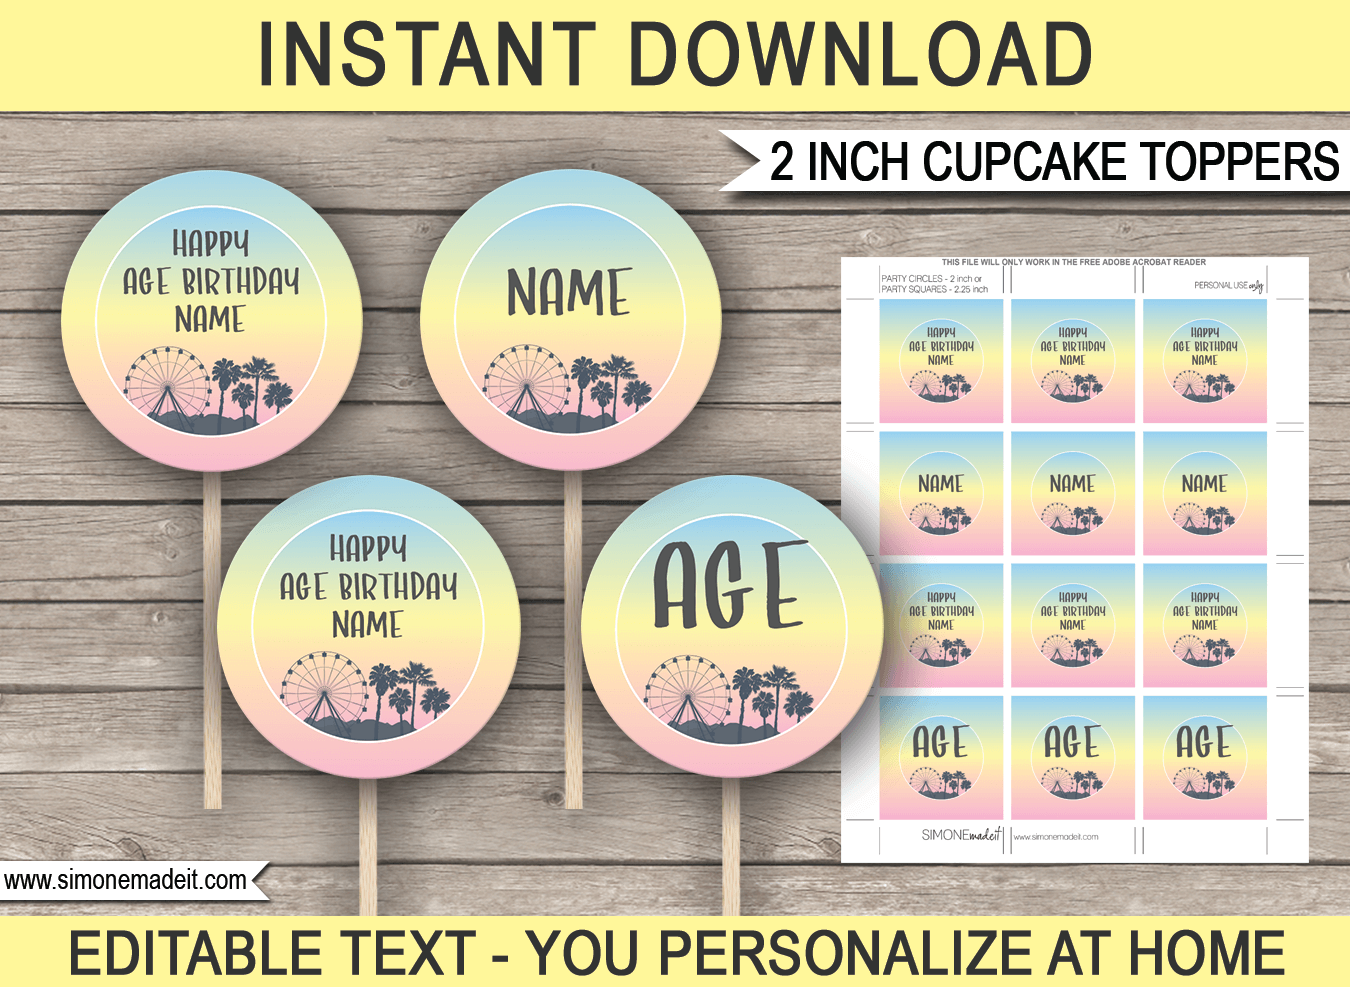 Printable Coachella Themed Party Cupcake Toppers | 2 inch | Festival Theme Birthday Party | Gala, Fete, Fair, Carnival | DIY Editable Template | INSTANT DOWNLOAD via simonemadeit.com